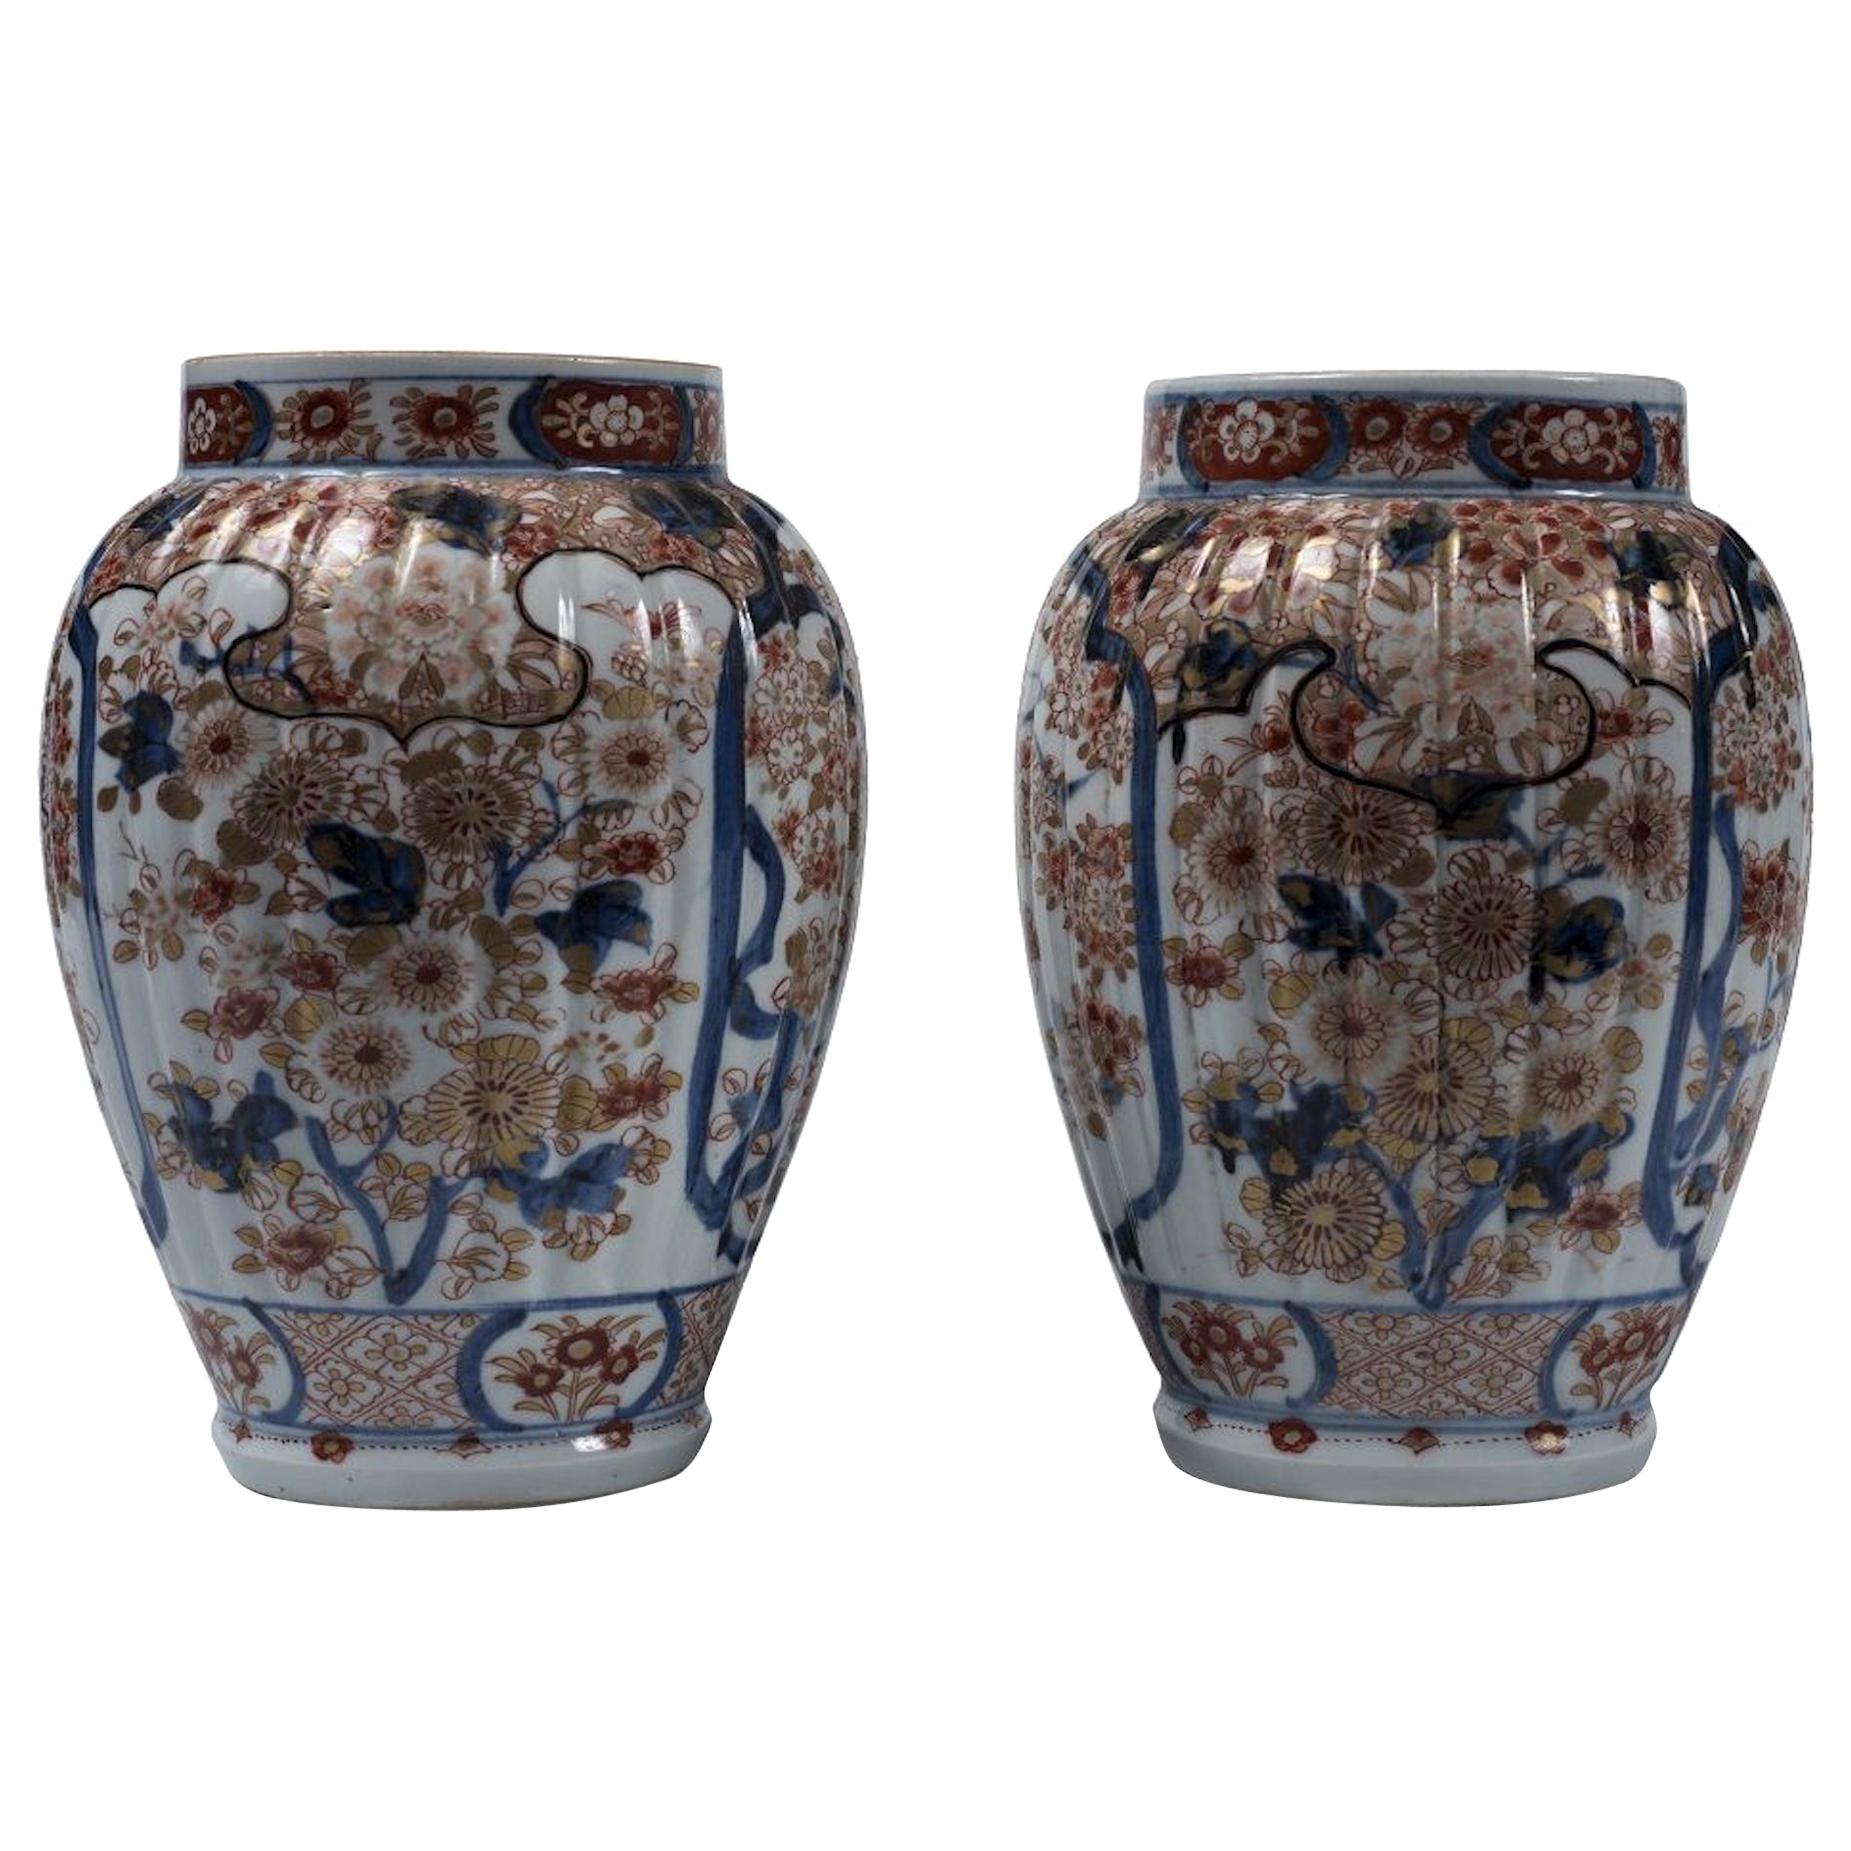 Pair of Antique Japanese Porcelain Vases, End of 19th Century